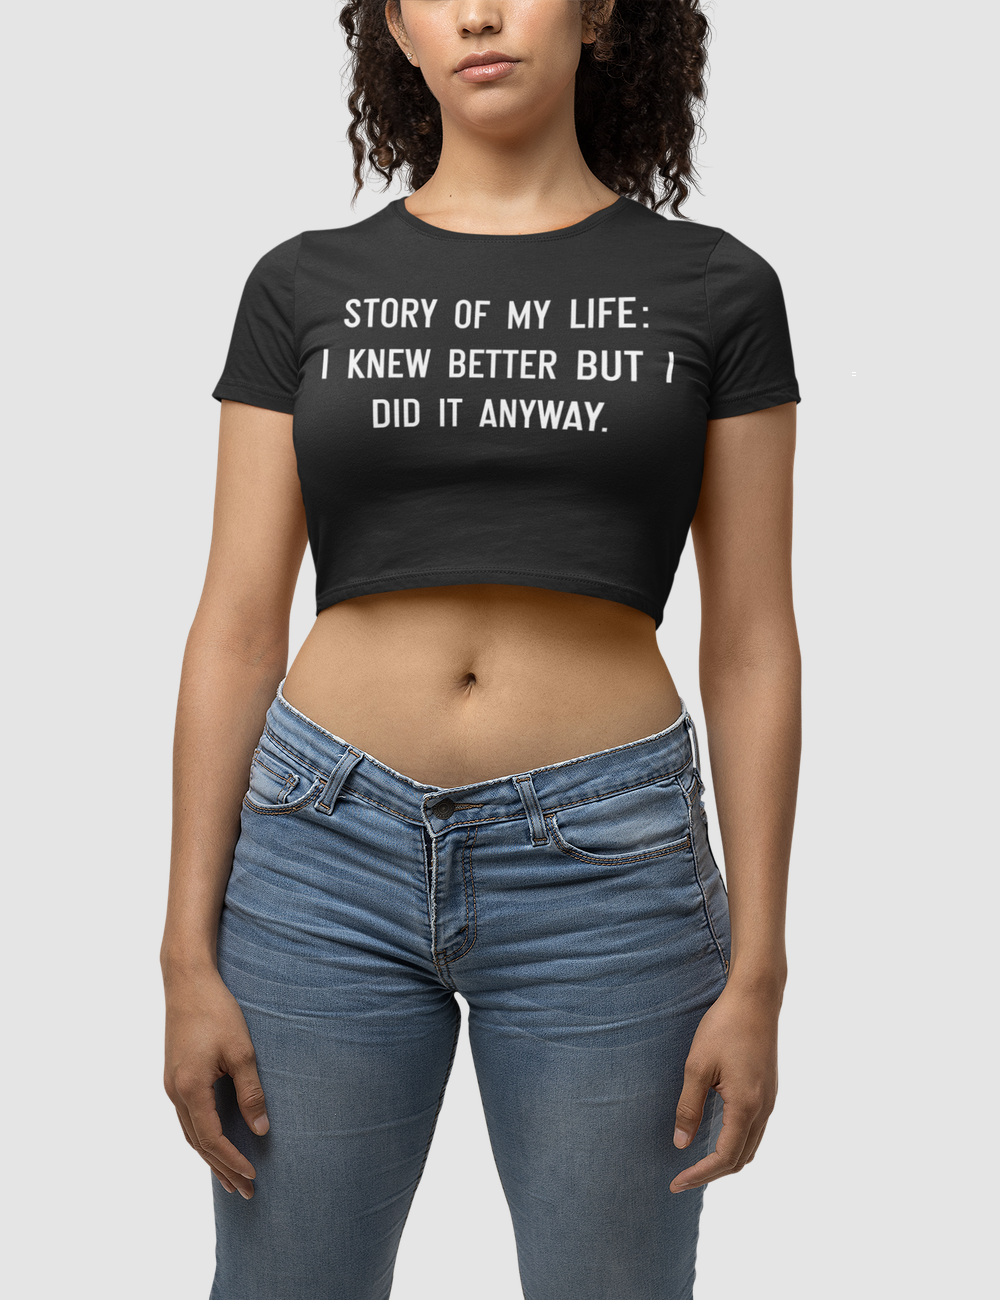 Story Of My Life | Women's Fitted Crop Top T-Shirt OniTakai